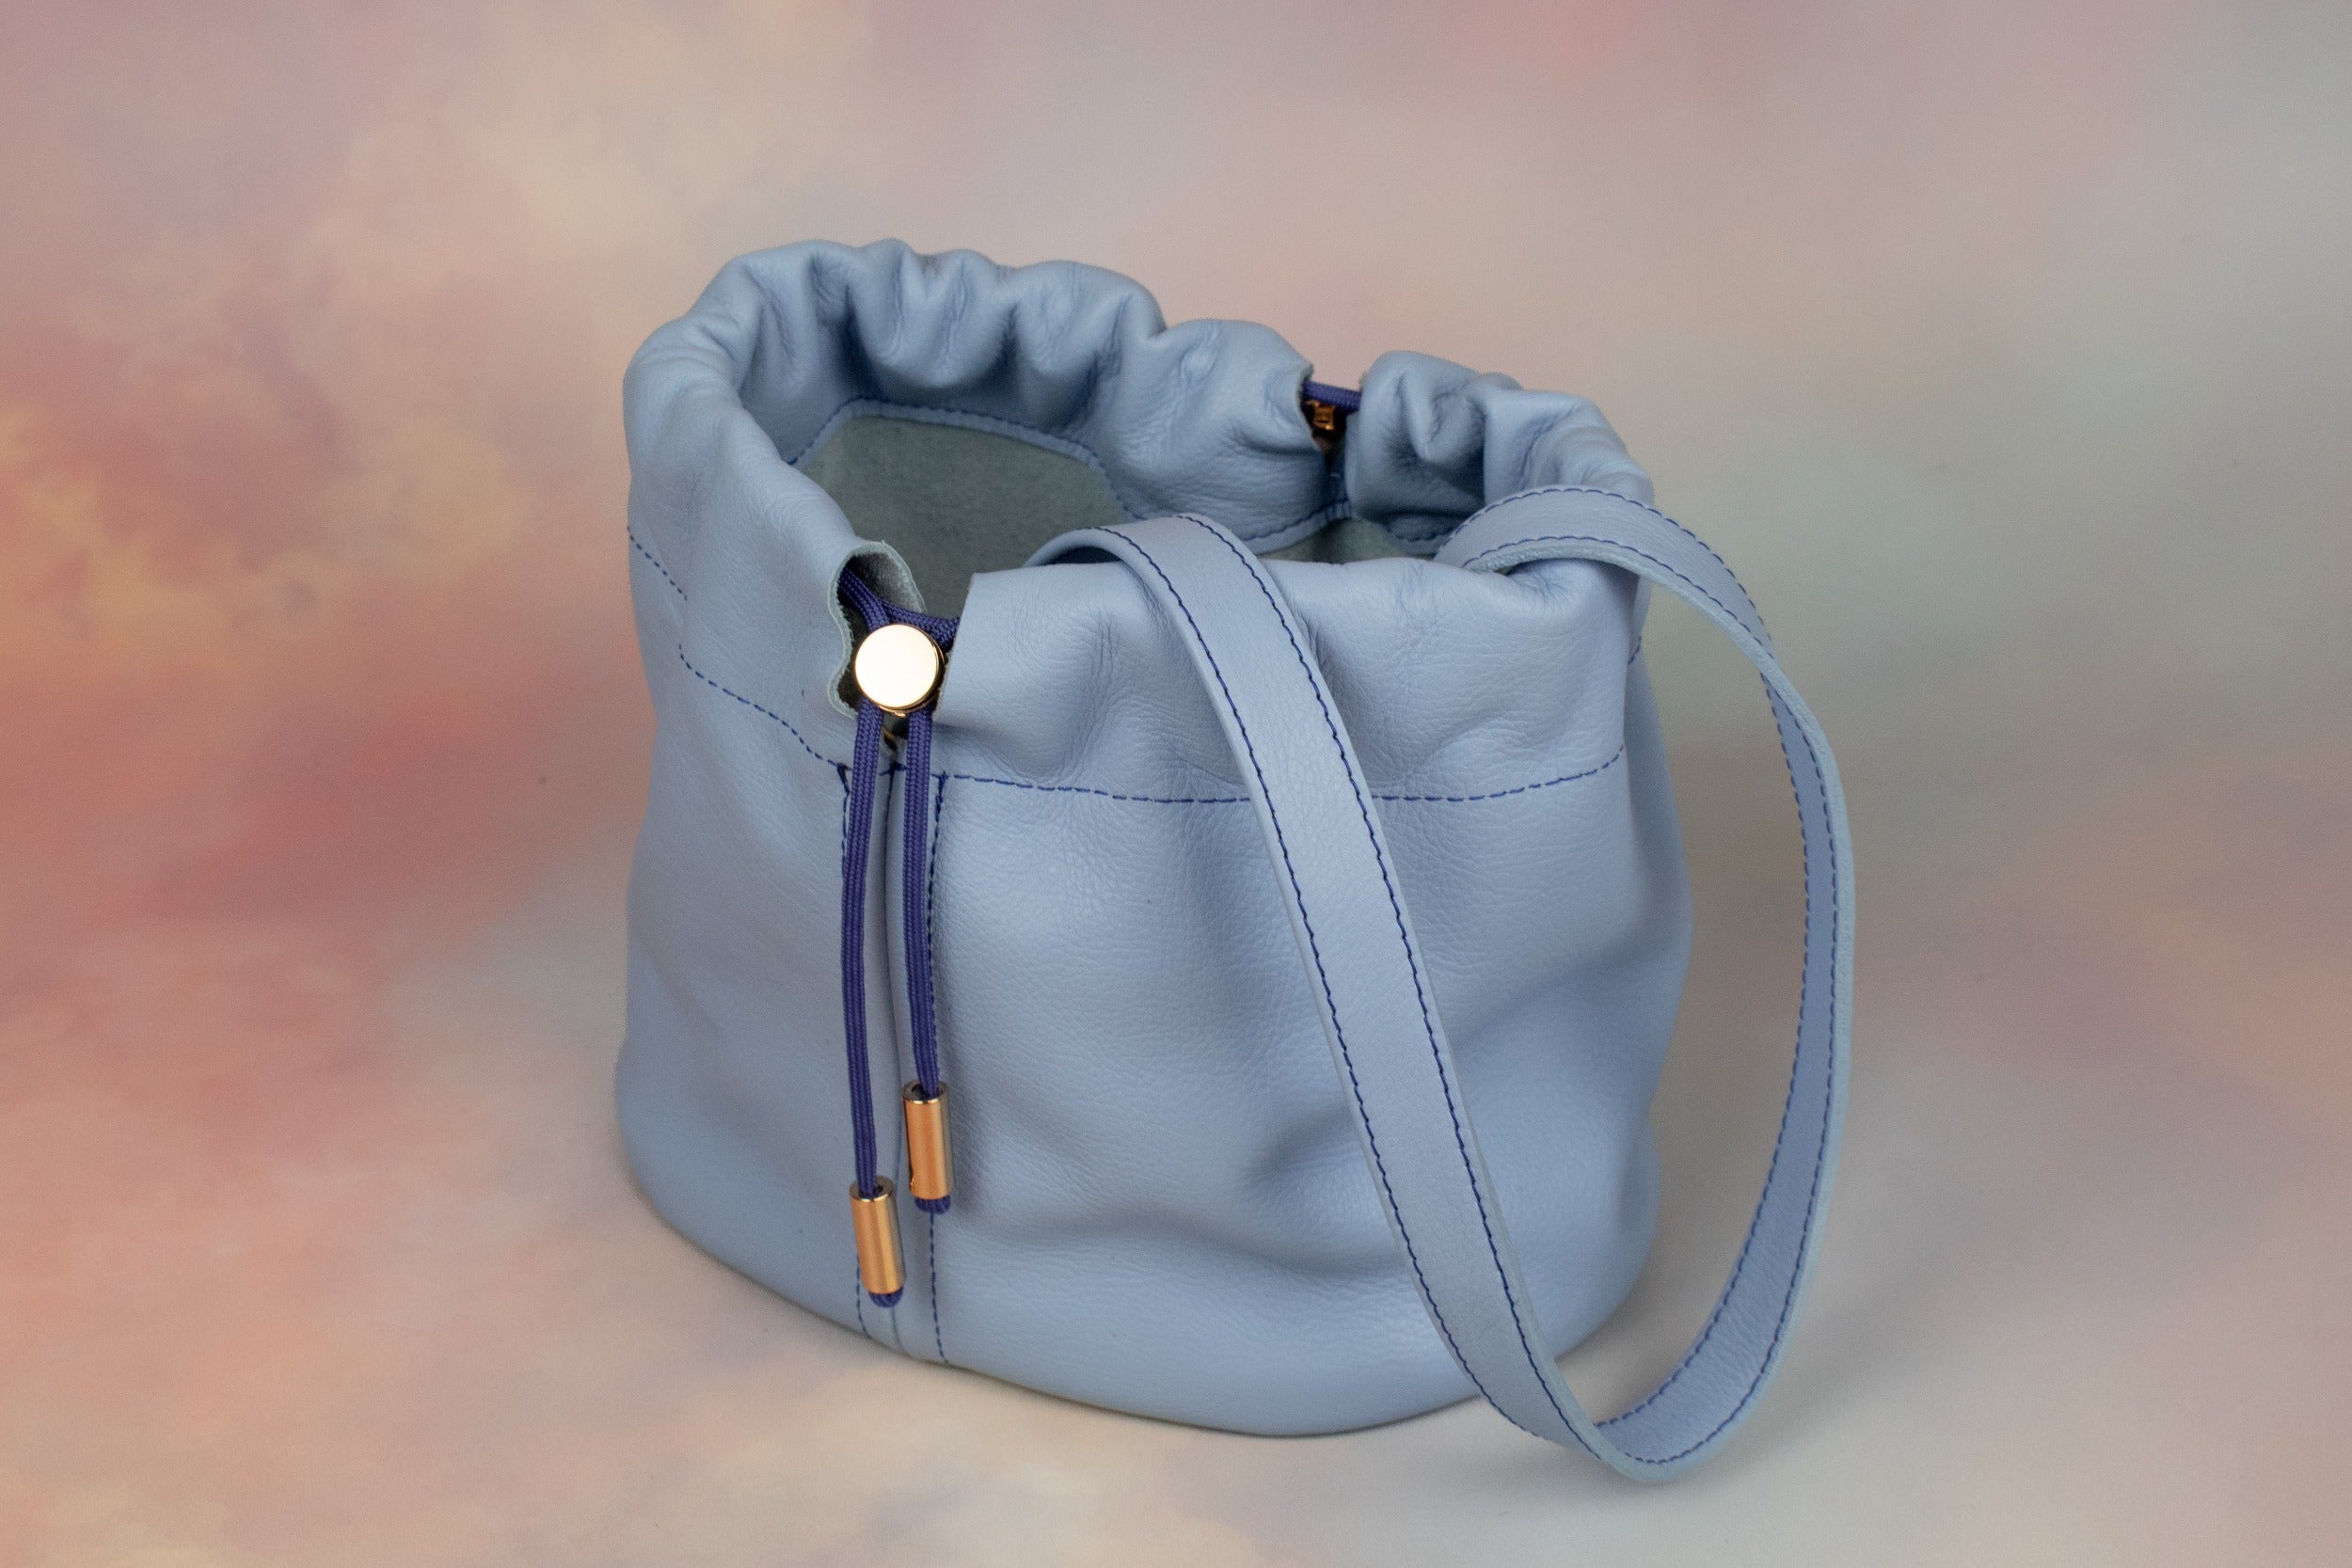 periwinkle bag with ruched drawstring closure